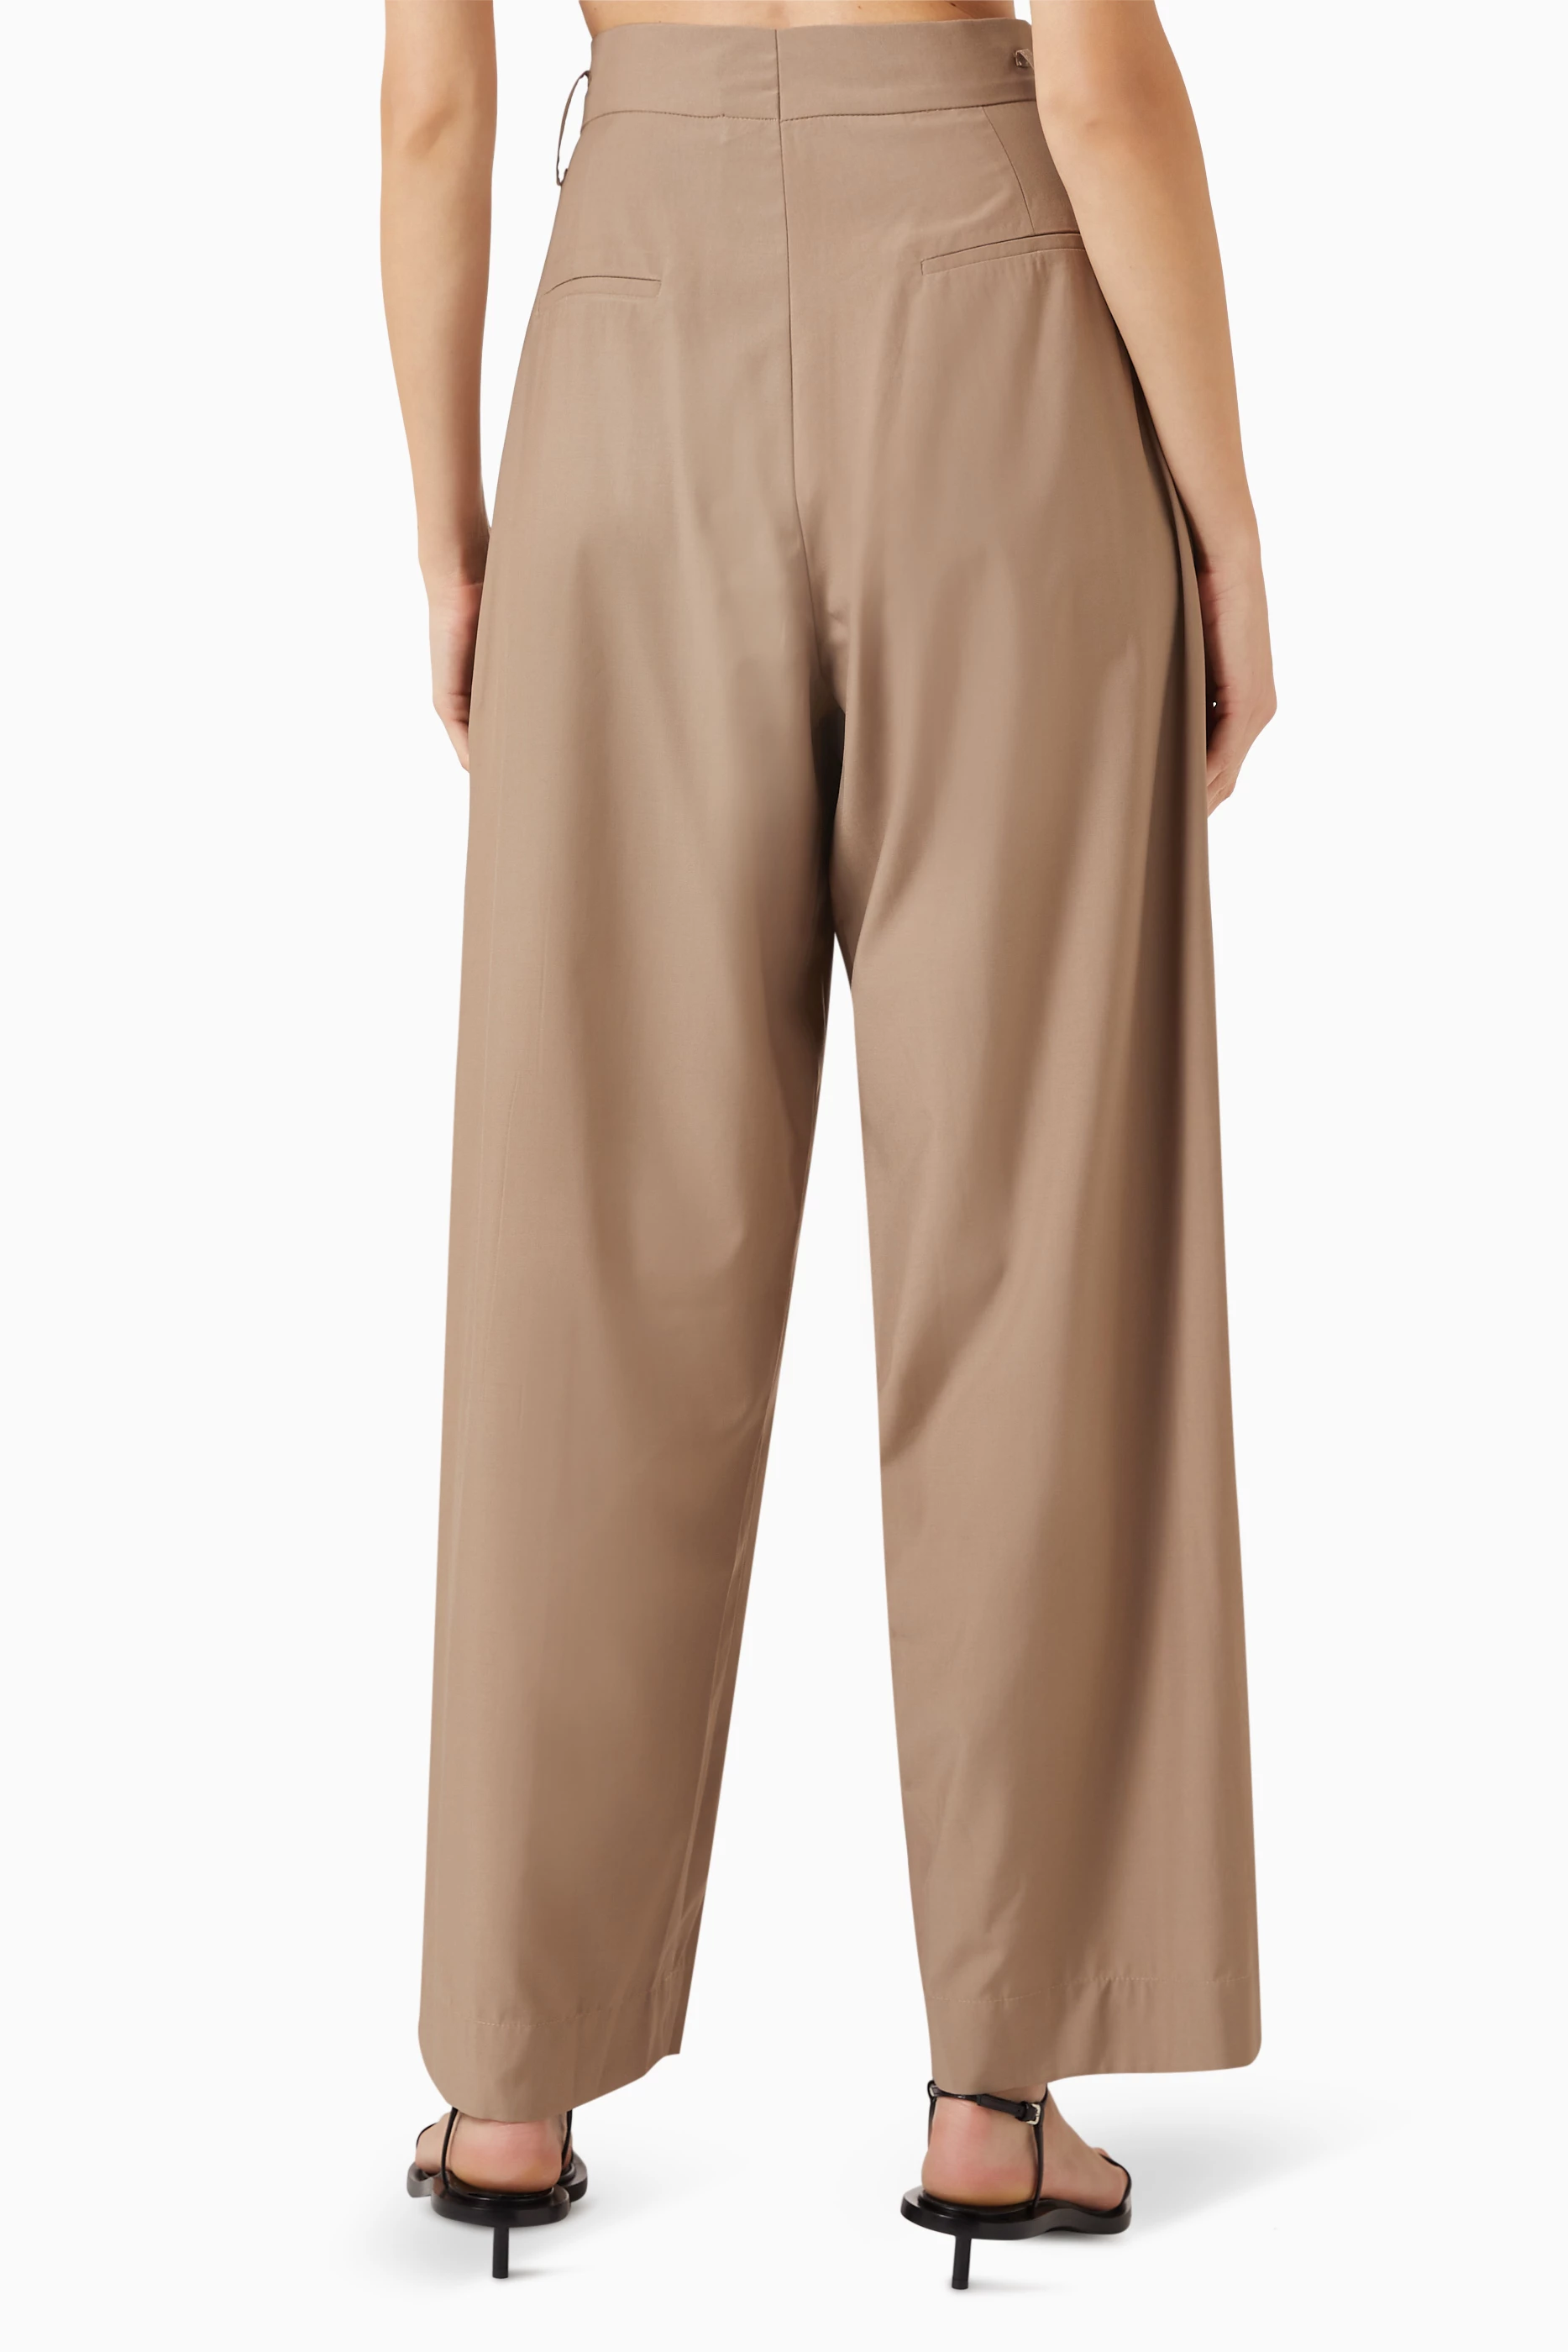 Buy Lovebirds Neutral Loose-fit Pants in Terry-rayon for Women in Saudi